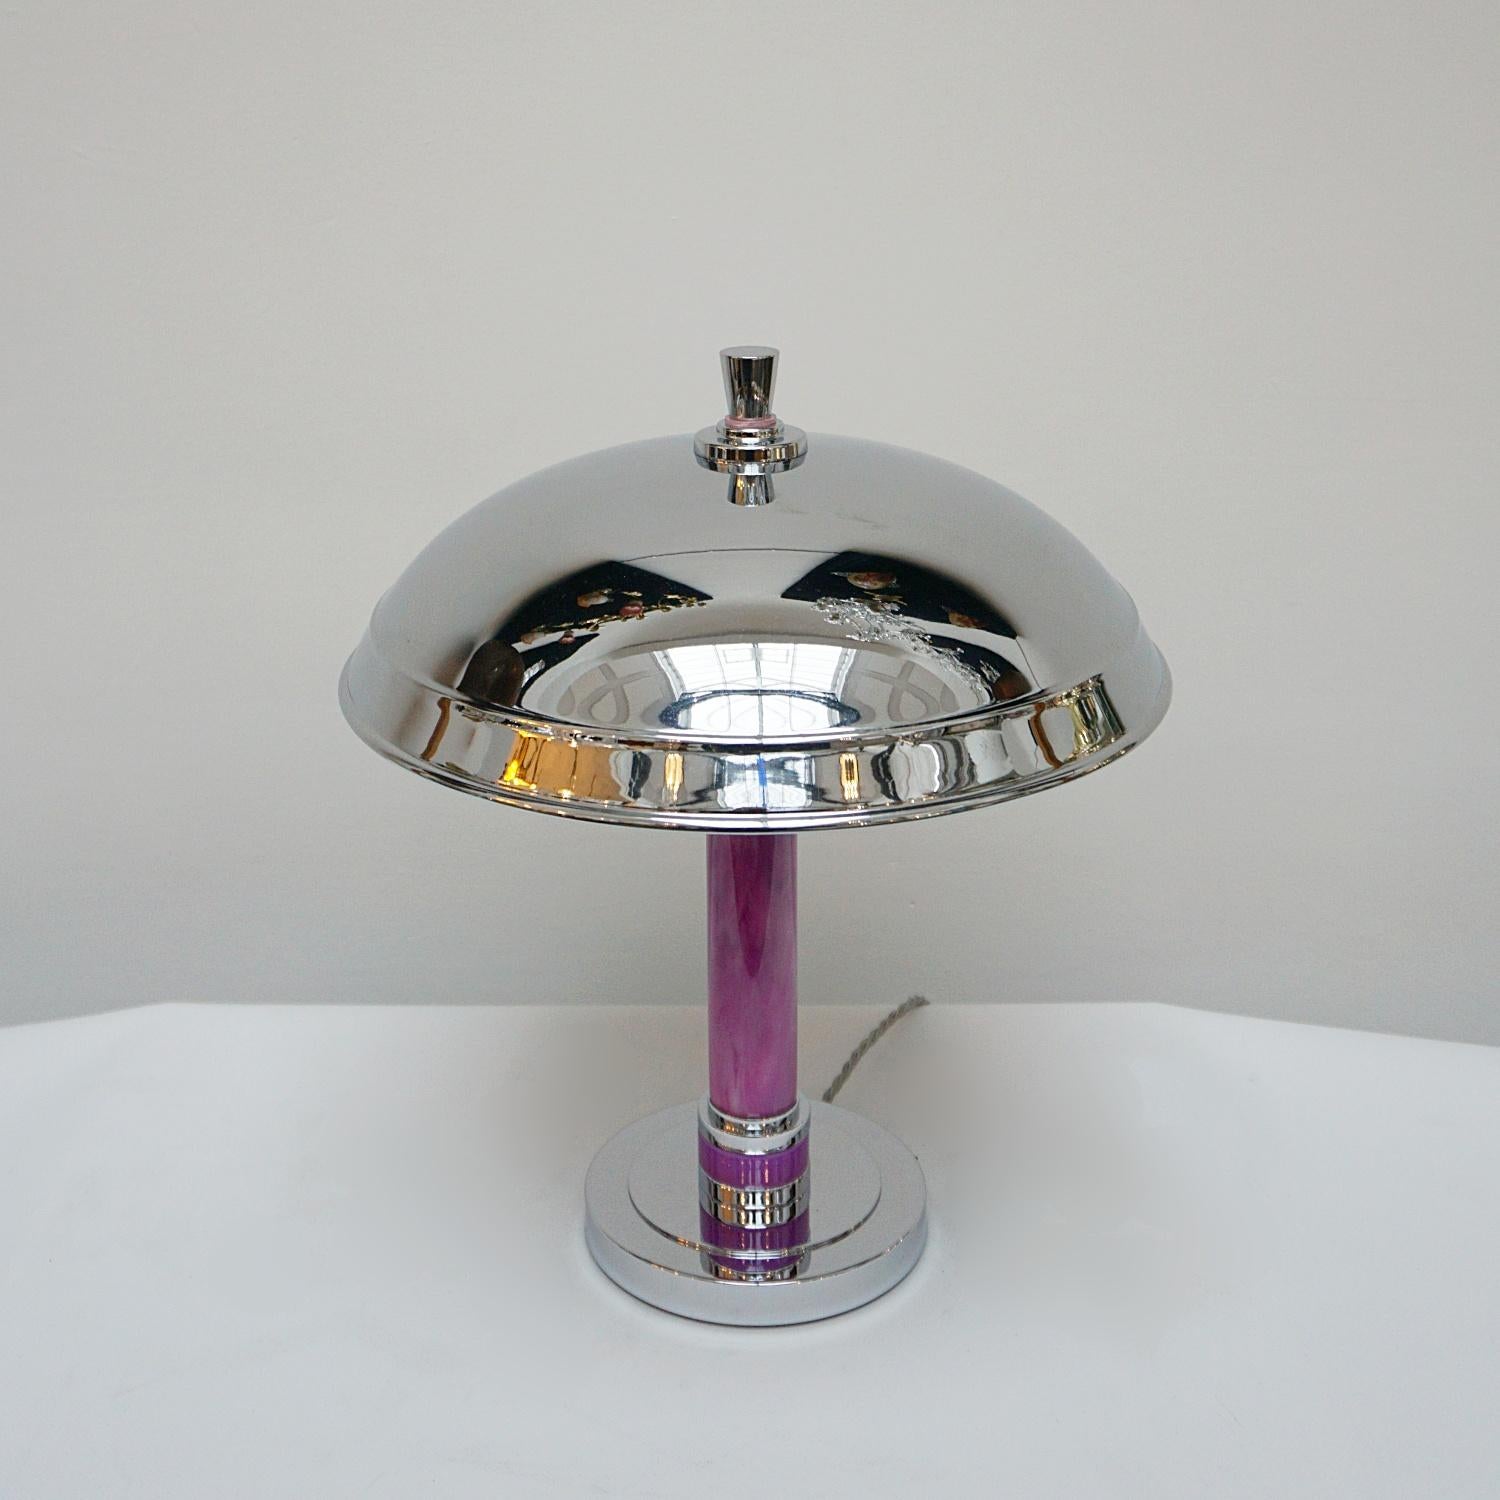 A tall Art Deco table lamp with a domed shade. Tubular, purple coloured bakelite stem with bands of chromed metal and alternating discs of bakelite. Set over a flat base. Metal finial to top.

Dimensions: height 41cm, diameter of shade: 35cm,